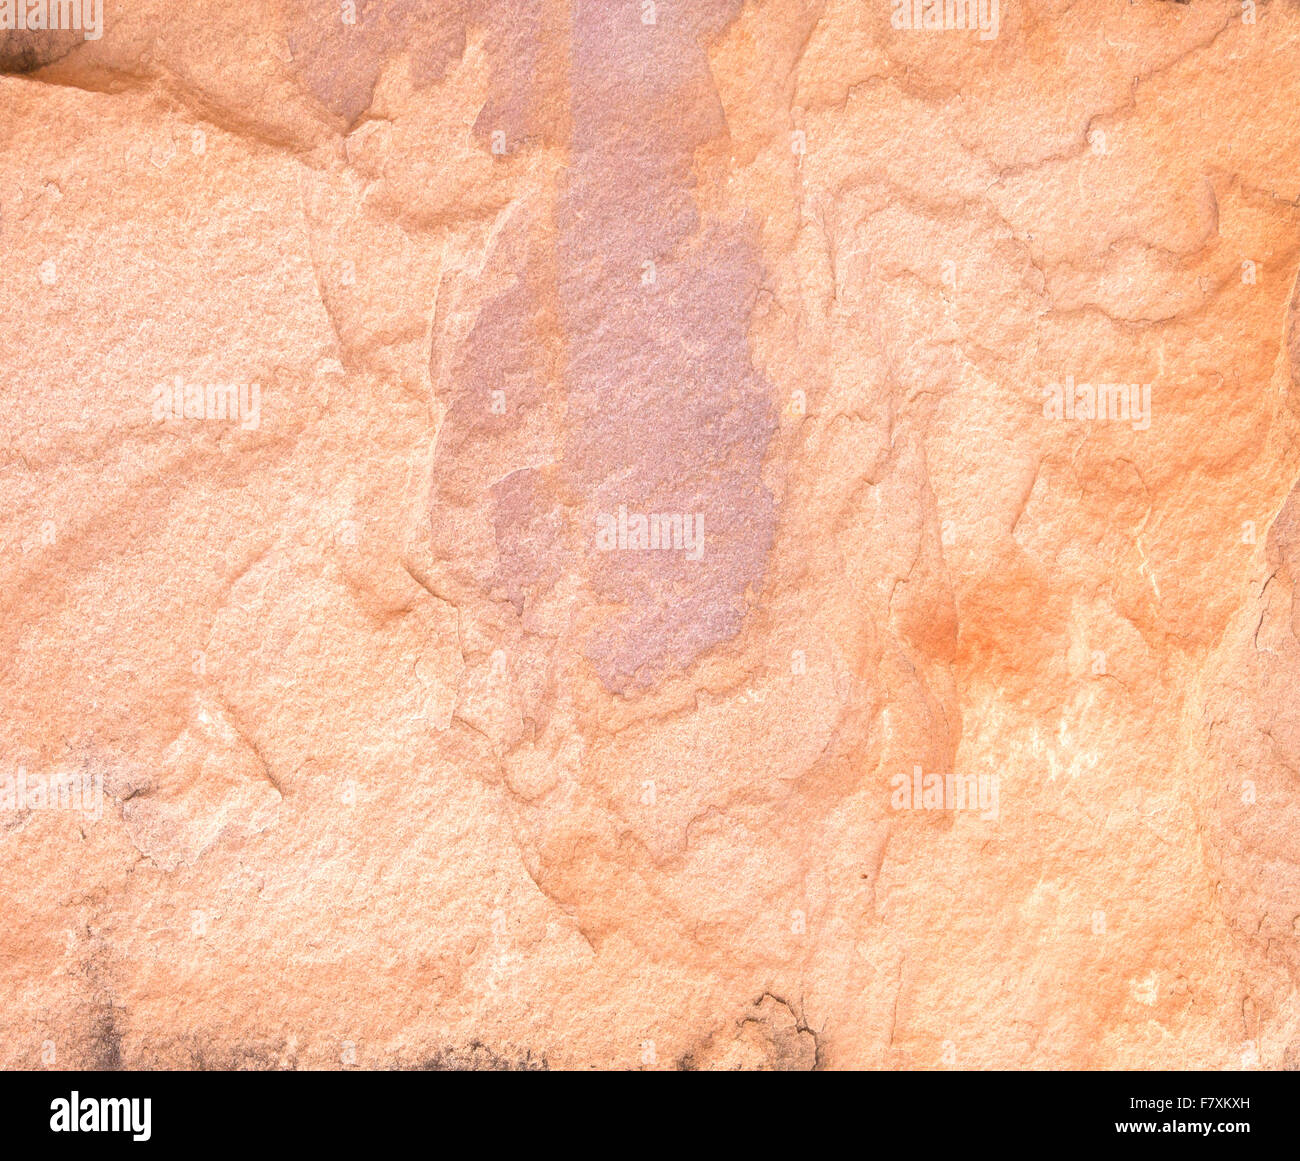 surface of the marble with brown tint Stock Photo